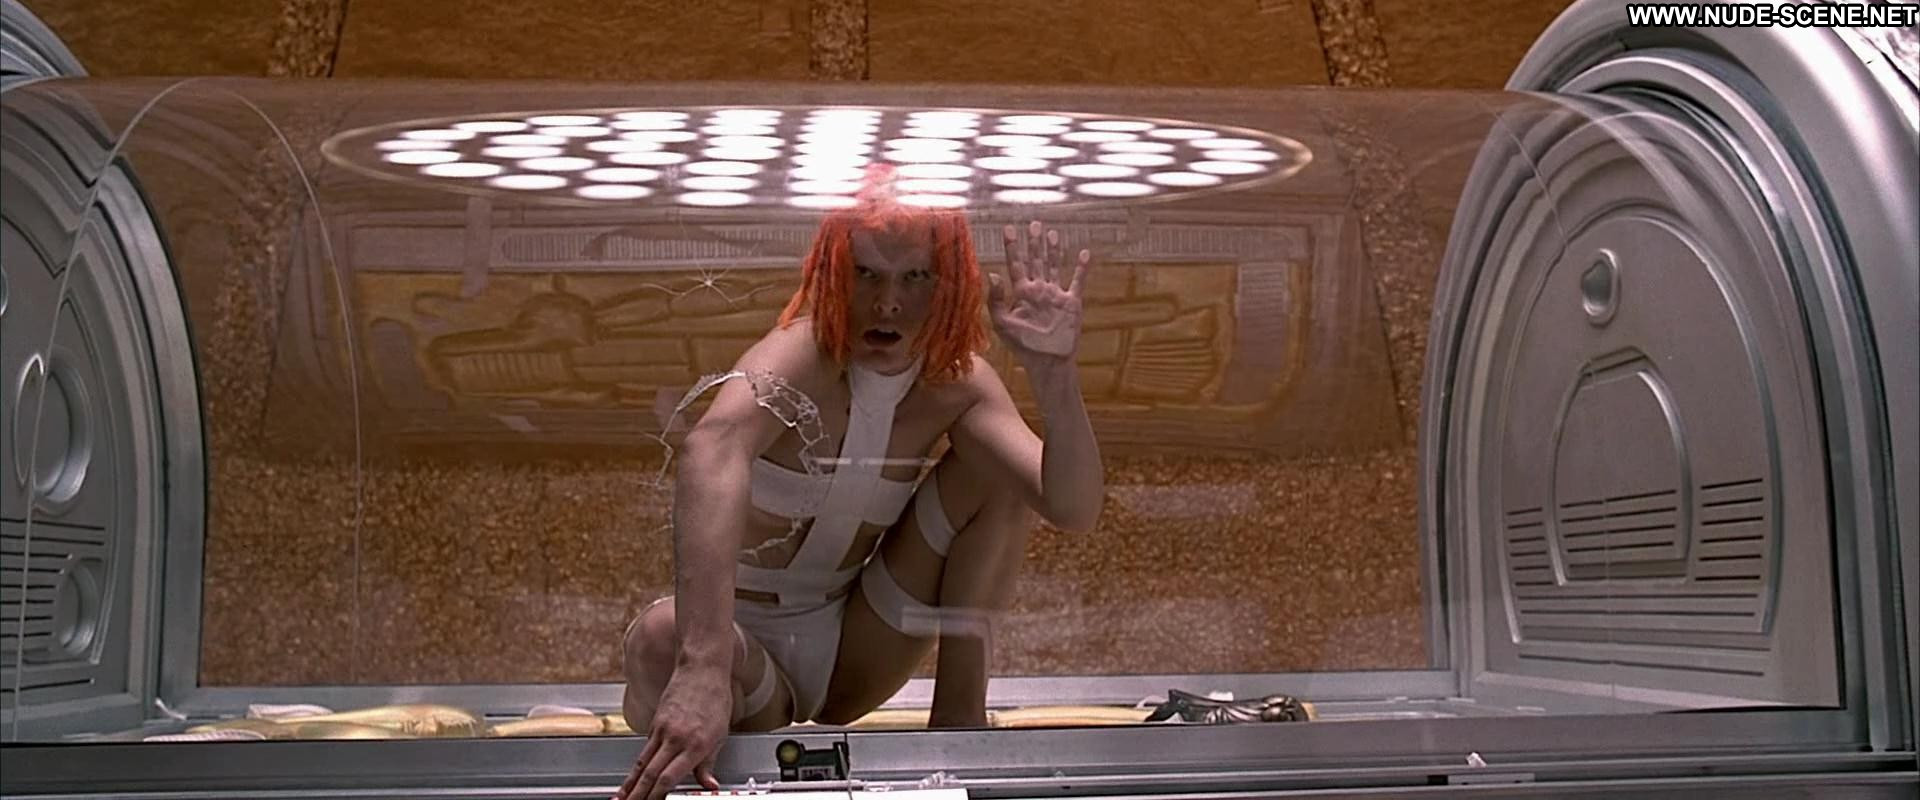 The Fifth Element Remastered Milla Jovovich Celebrity Posing Hot.